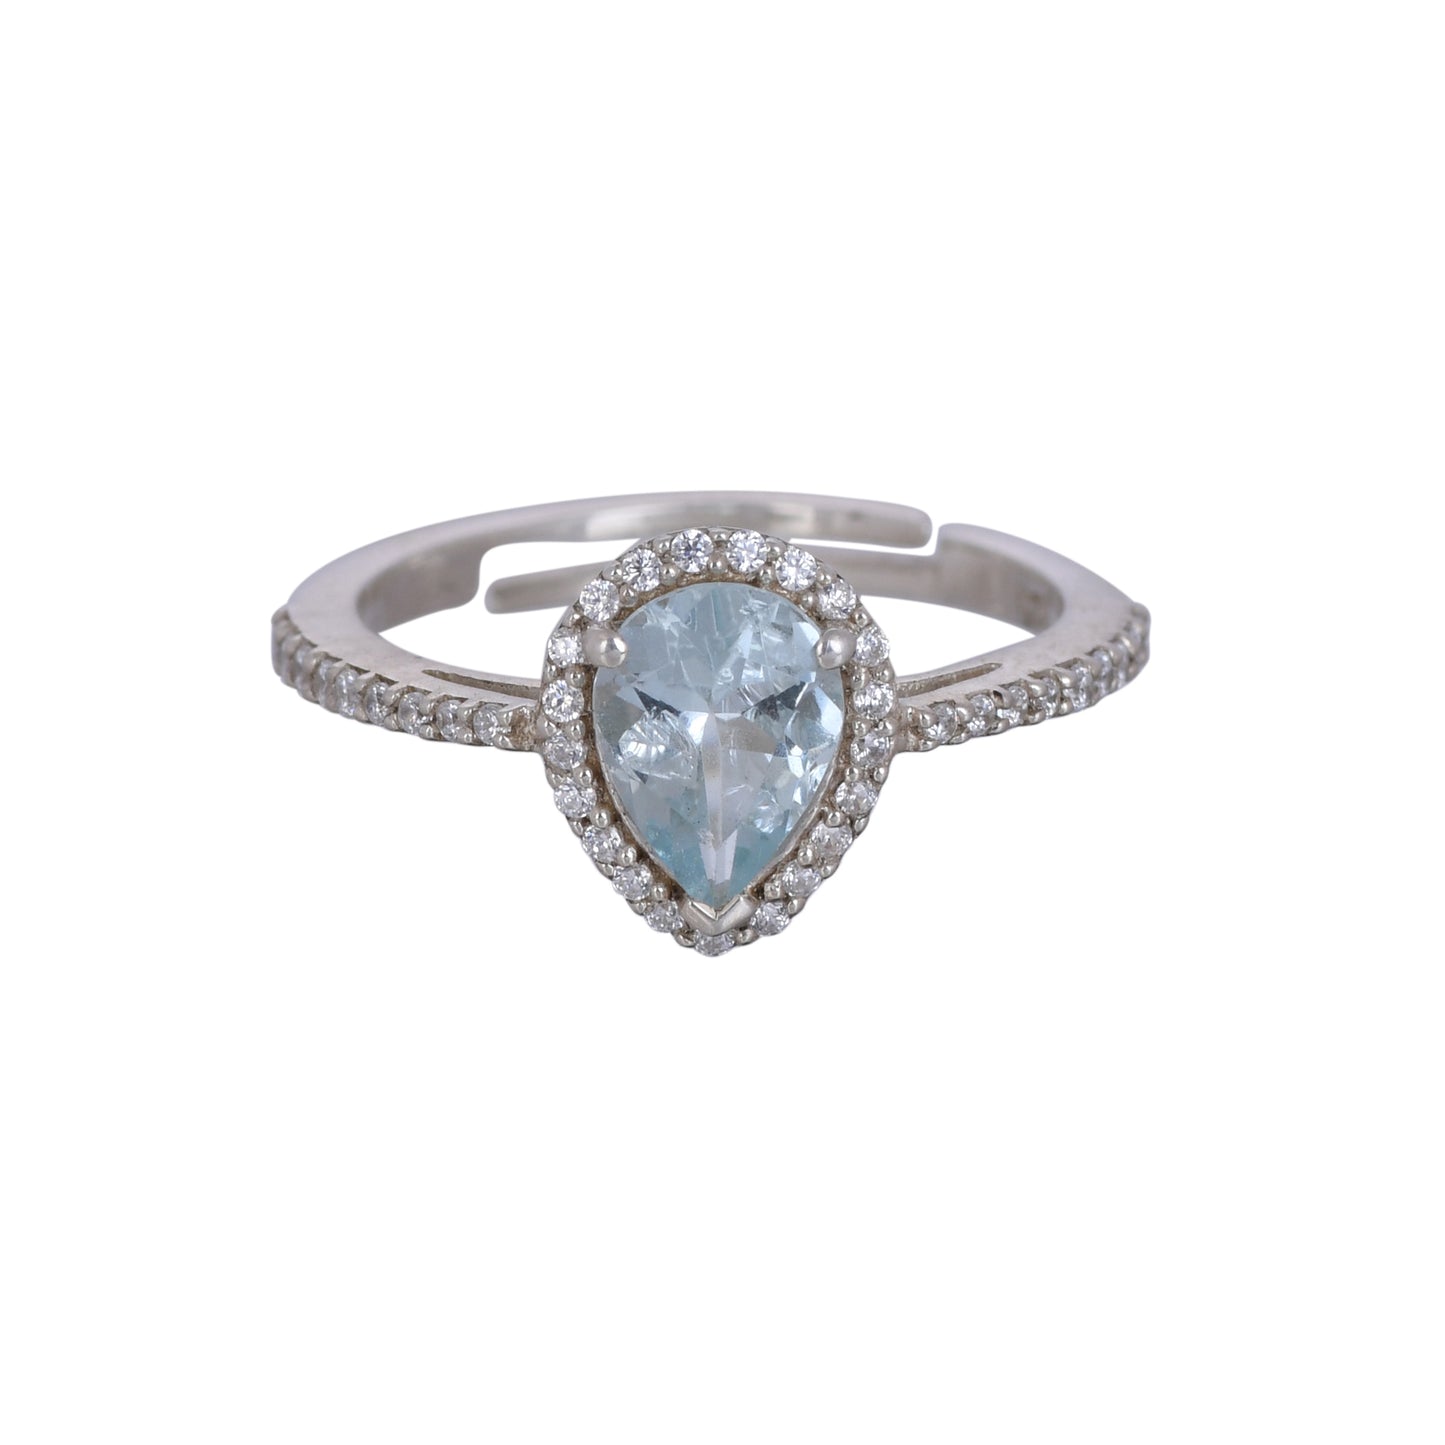 Pear Blue Topaz Silver Ring - From Purl Purl